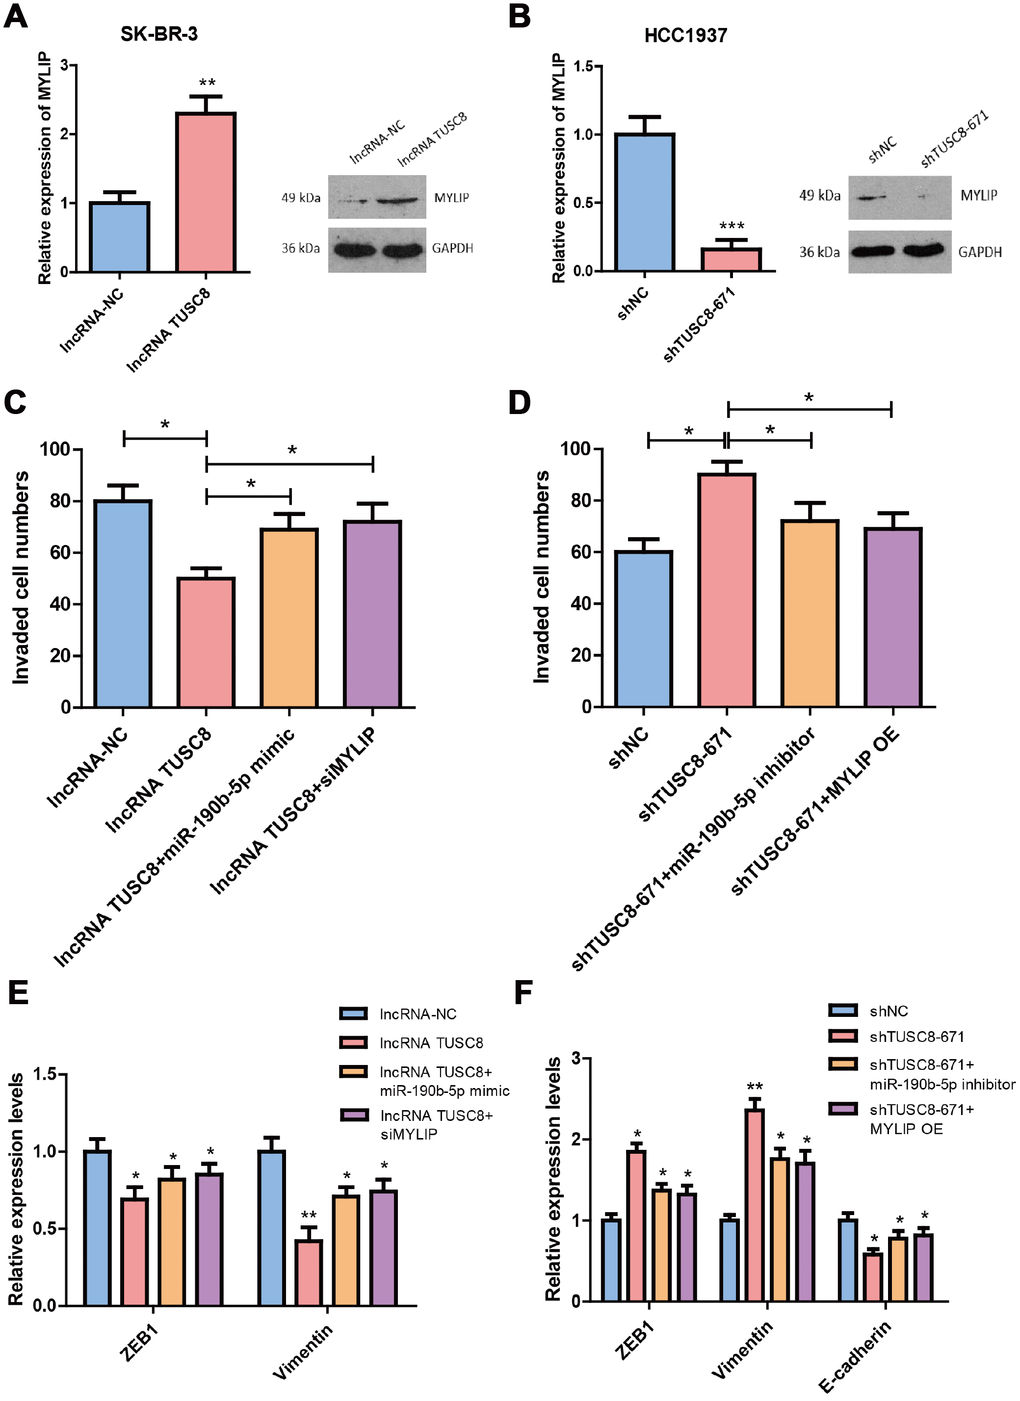 TUSC8 inhibits breast cancer cell invasive capacity partly through miR-190b-5p-MYLIP axis. (A) Over-expression of TUSC8 significantly increased the mRNA and protein levels of MYLIP in SK-BR-3 cells. (B) Knock-down of TUSC8 drastically suppressed the mRNA and protein levels of MYLIP in HCC1937 cells. (C) Over-expression of miR-190b-5p or inhibition of MYLIP partly abolished the reduced cell invasive capacities mediated by TUSC8 over-expression in SK-BR-3 cells. (D) Inhibition of miR-190b-5p or MYLIP over-expression partly rescued the enhanced cell invasive capacities mediated by TUSC8 knock-down in HCC1937 cells. (E) Over-expression of miR-190b-5p or inhibition of MYLIP partly abolished the EMT related markers expression mediated by TUSC8 over-expression in SK-BR-3 cells. (F) Inhibition of miR-190b-5p or MYLIP over-expression partly rescued the EMT related markers expression mediated by TUSC8 knock-down in HCC1937 cells. The asterisks (*, **, ***) indicate a significant difference (p p p 